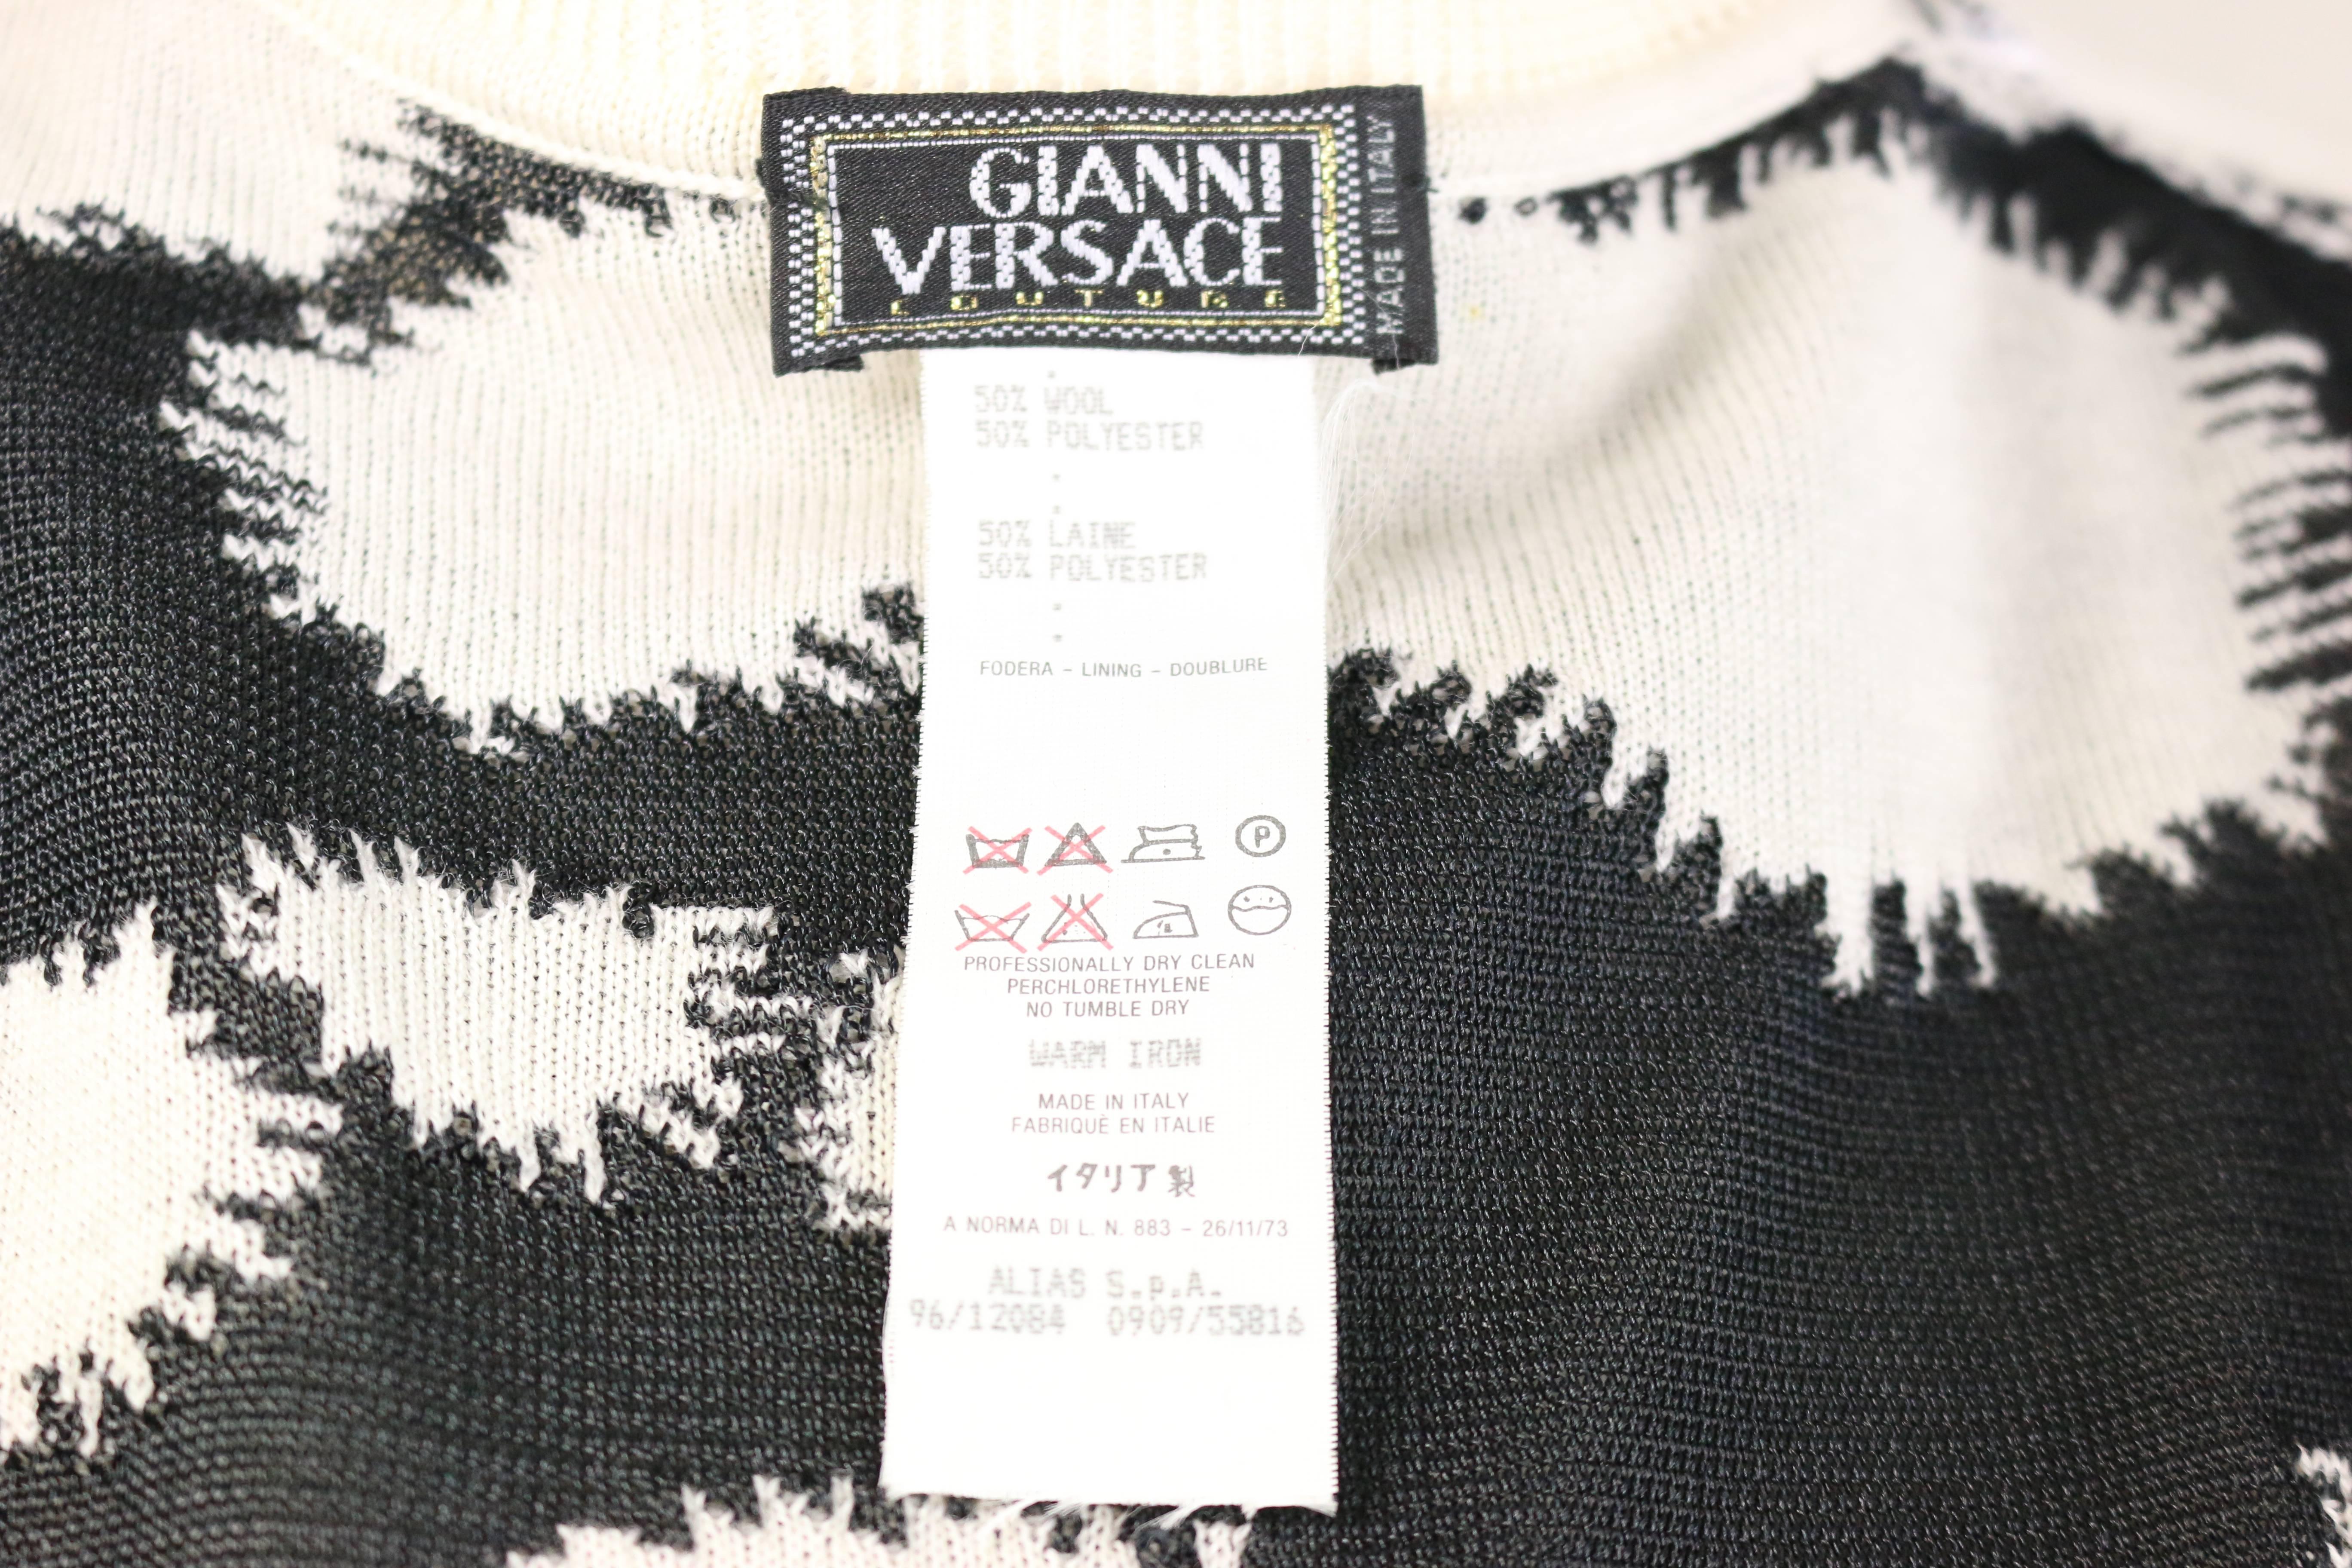 Vintage 90s Gianni Versace Black and White Print Top and Skirt Ensemble Set  In New Condition For Sale In Sheung Wan, HK